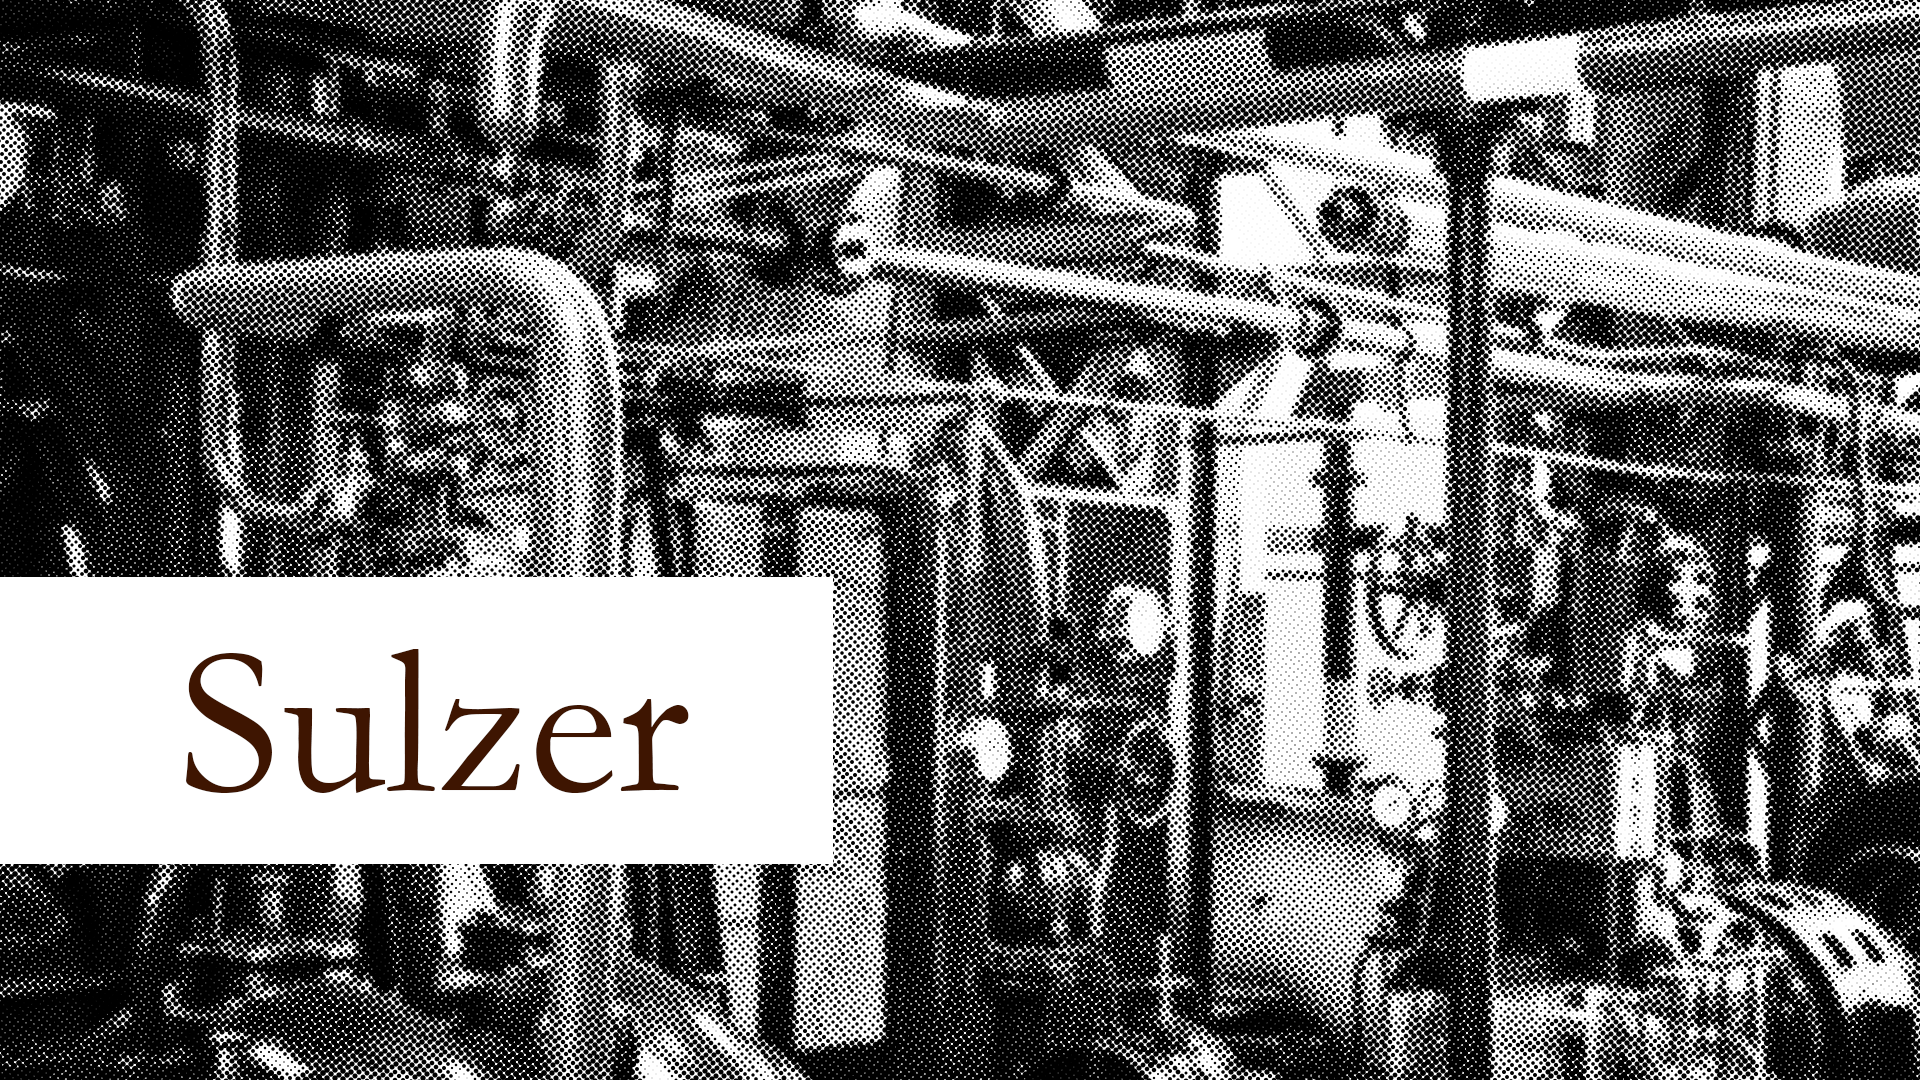 Sulzer for its growth momentum and biofuels